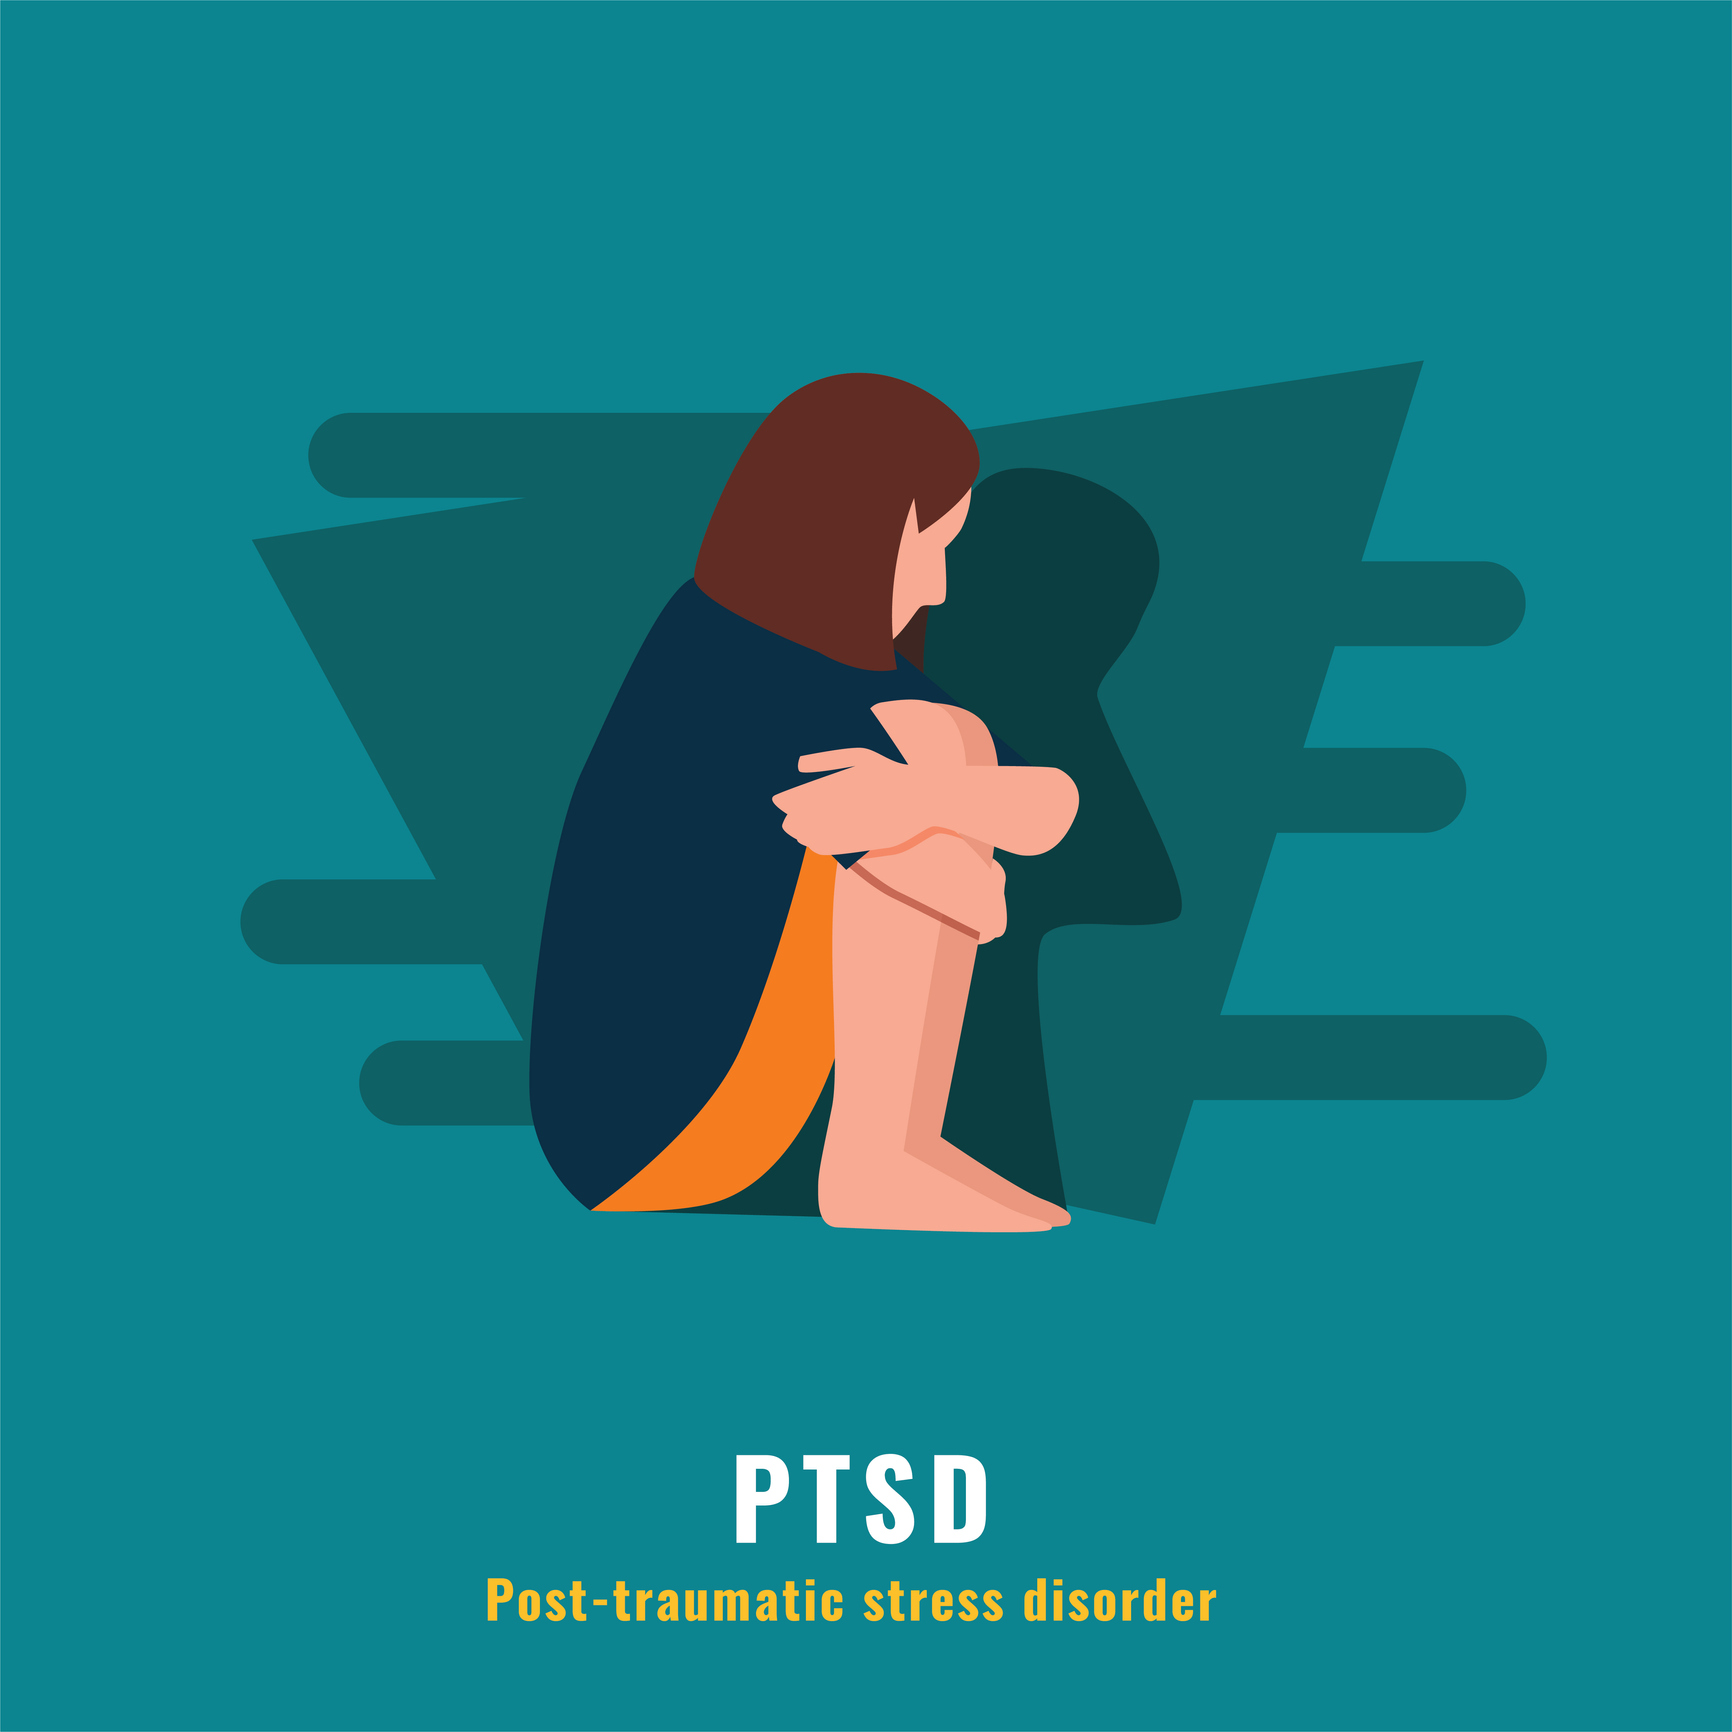 Is What You're Feeling PTSD? What To Do To Help